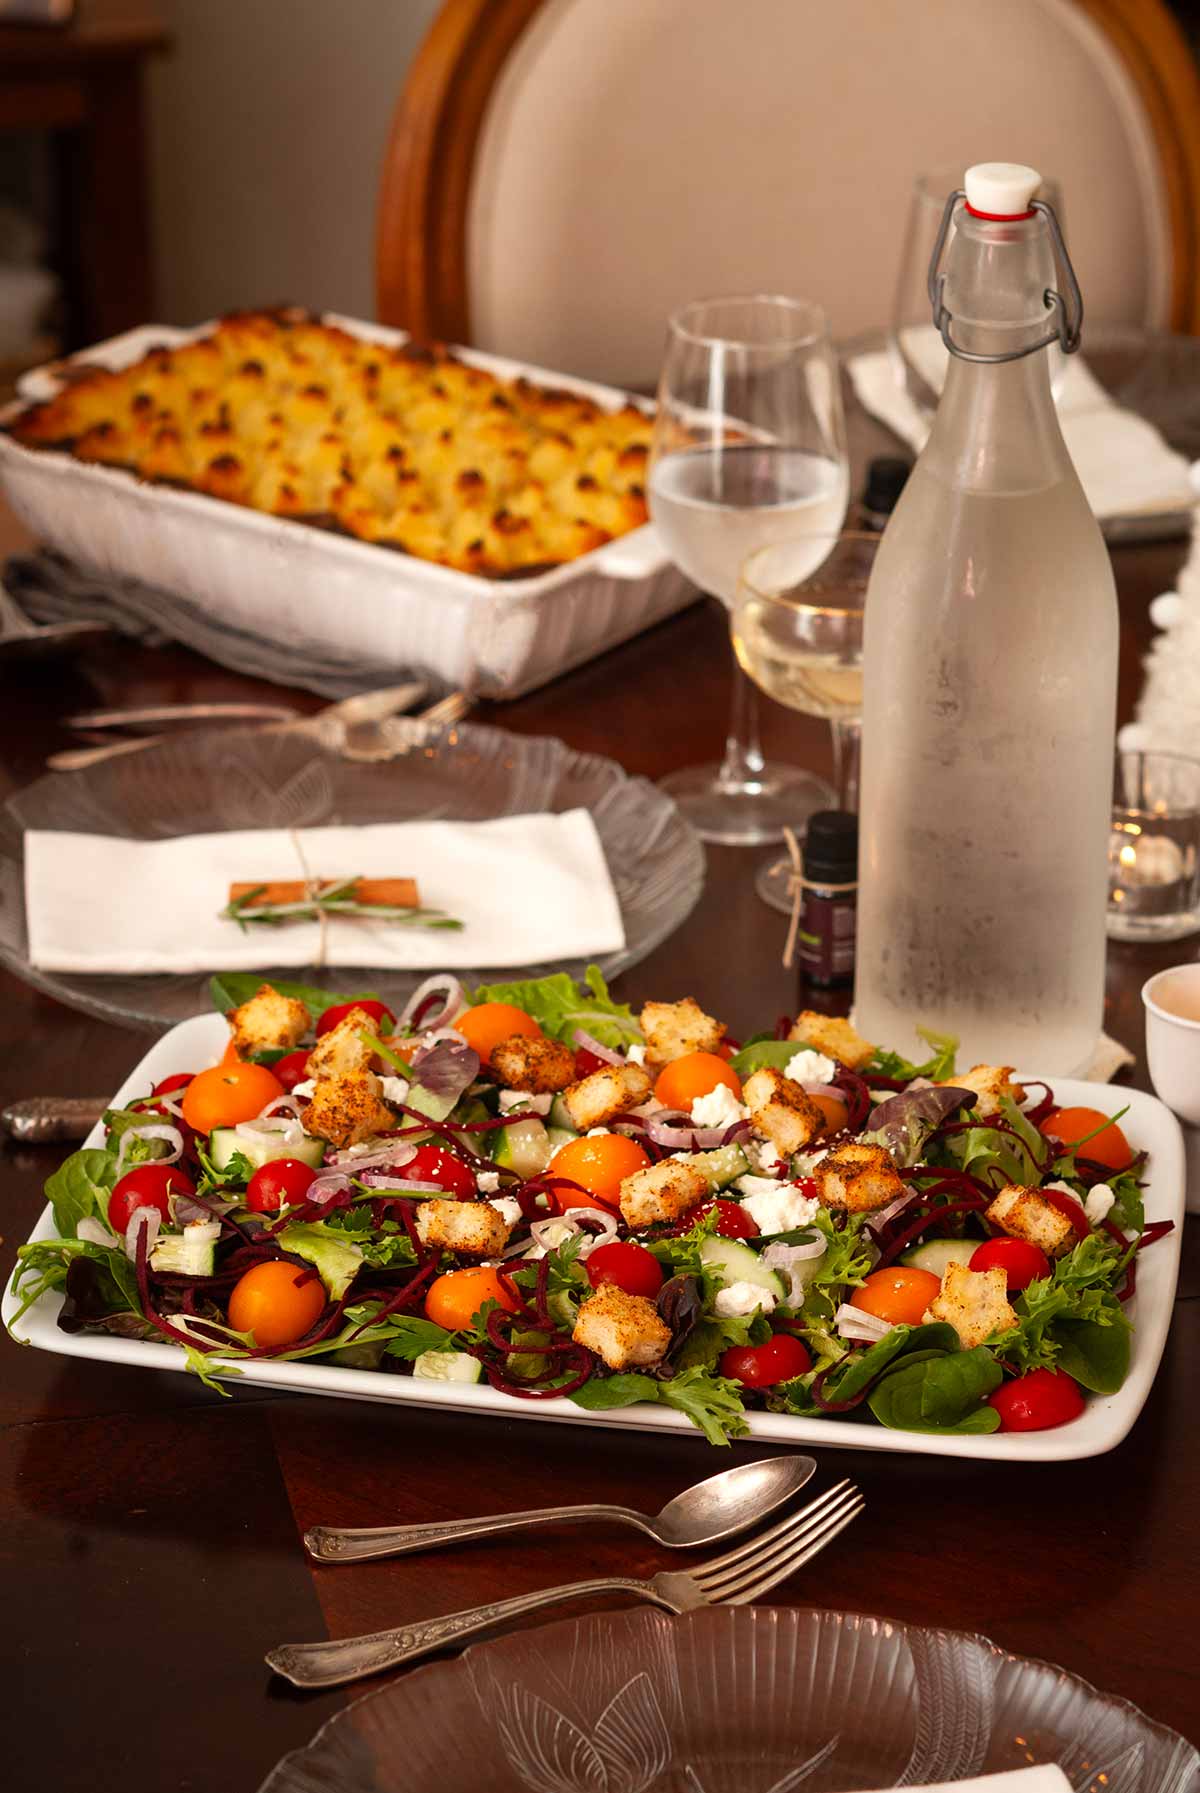 A salad on a table in front of shepherd's pie.